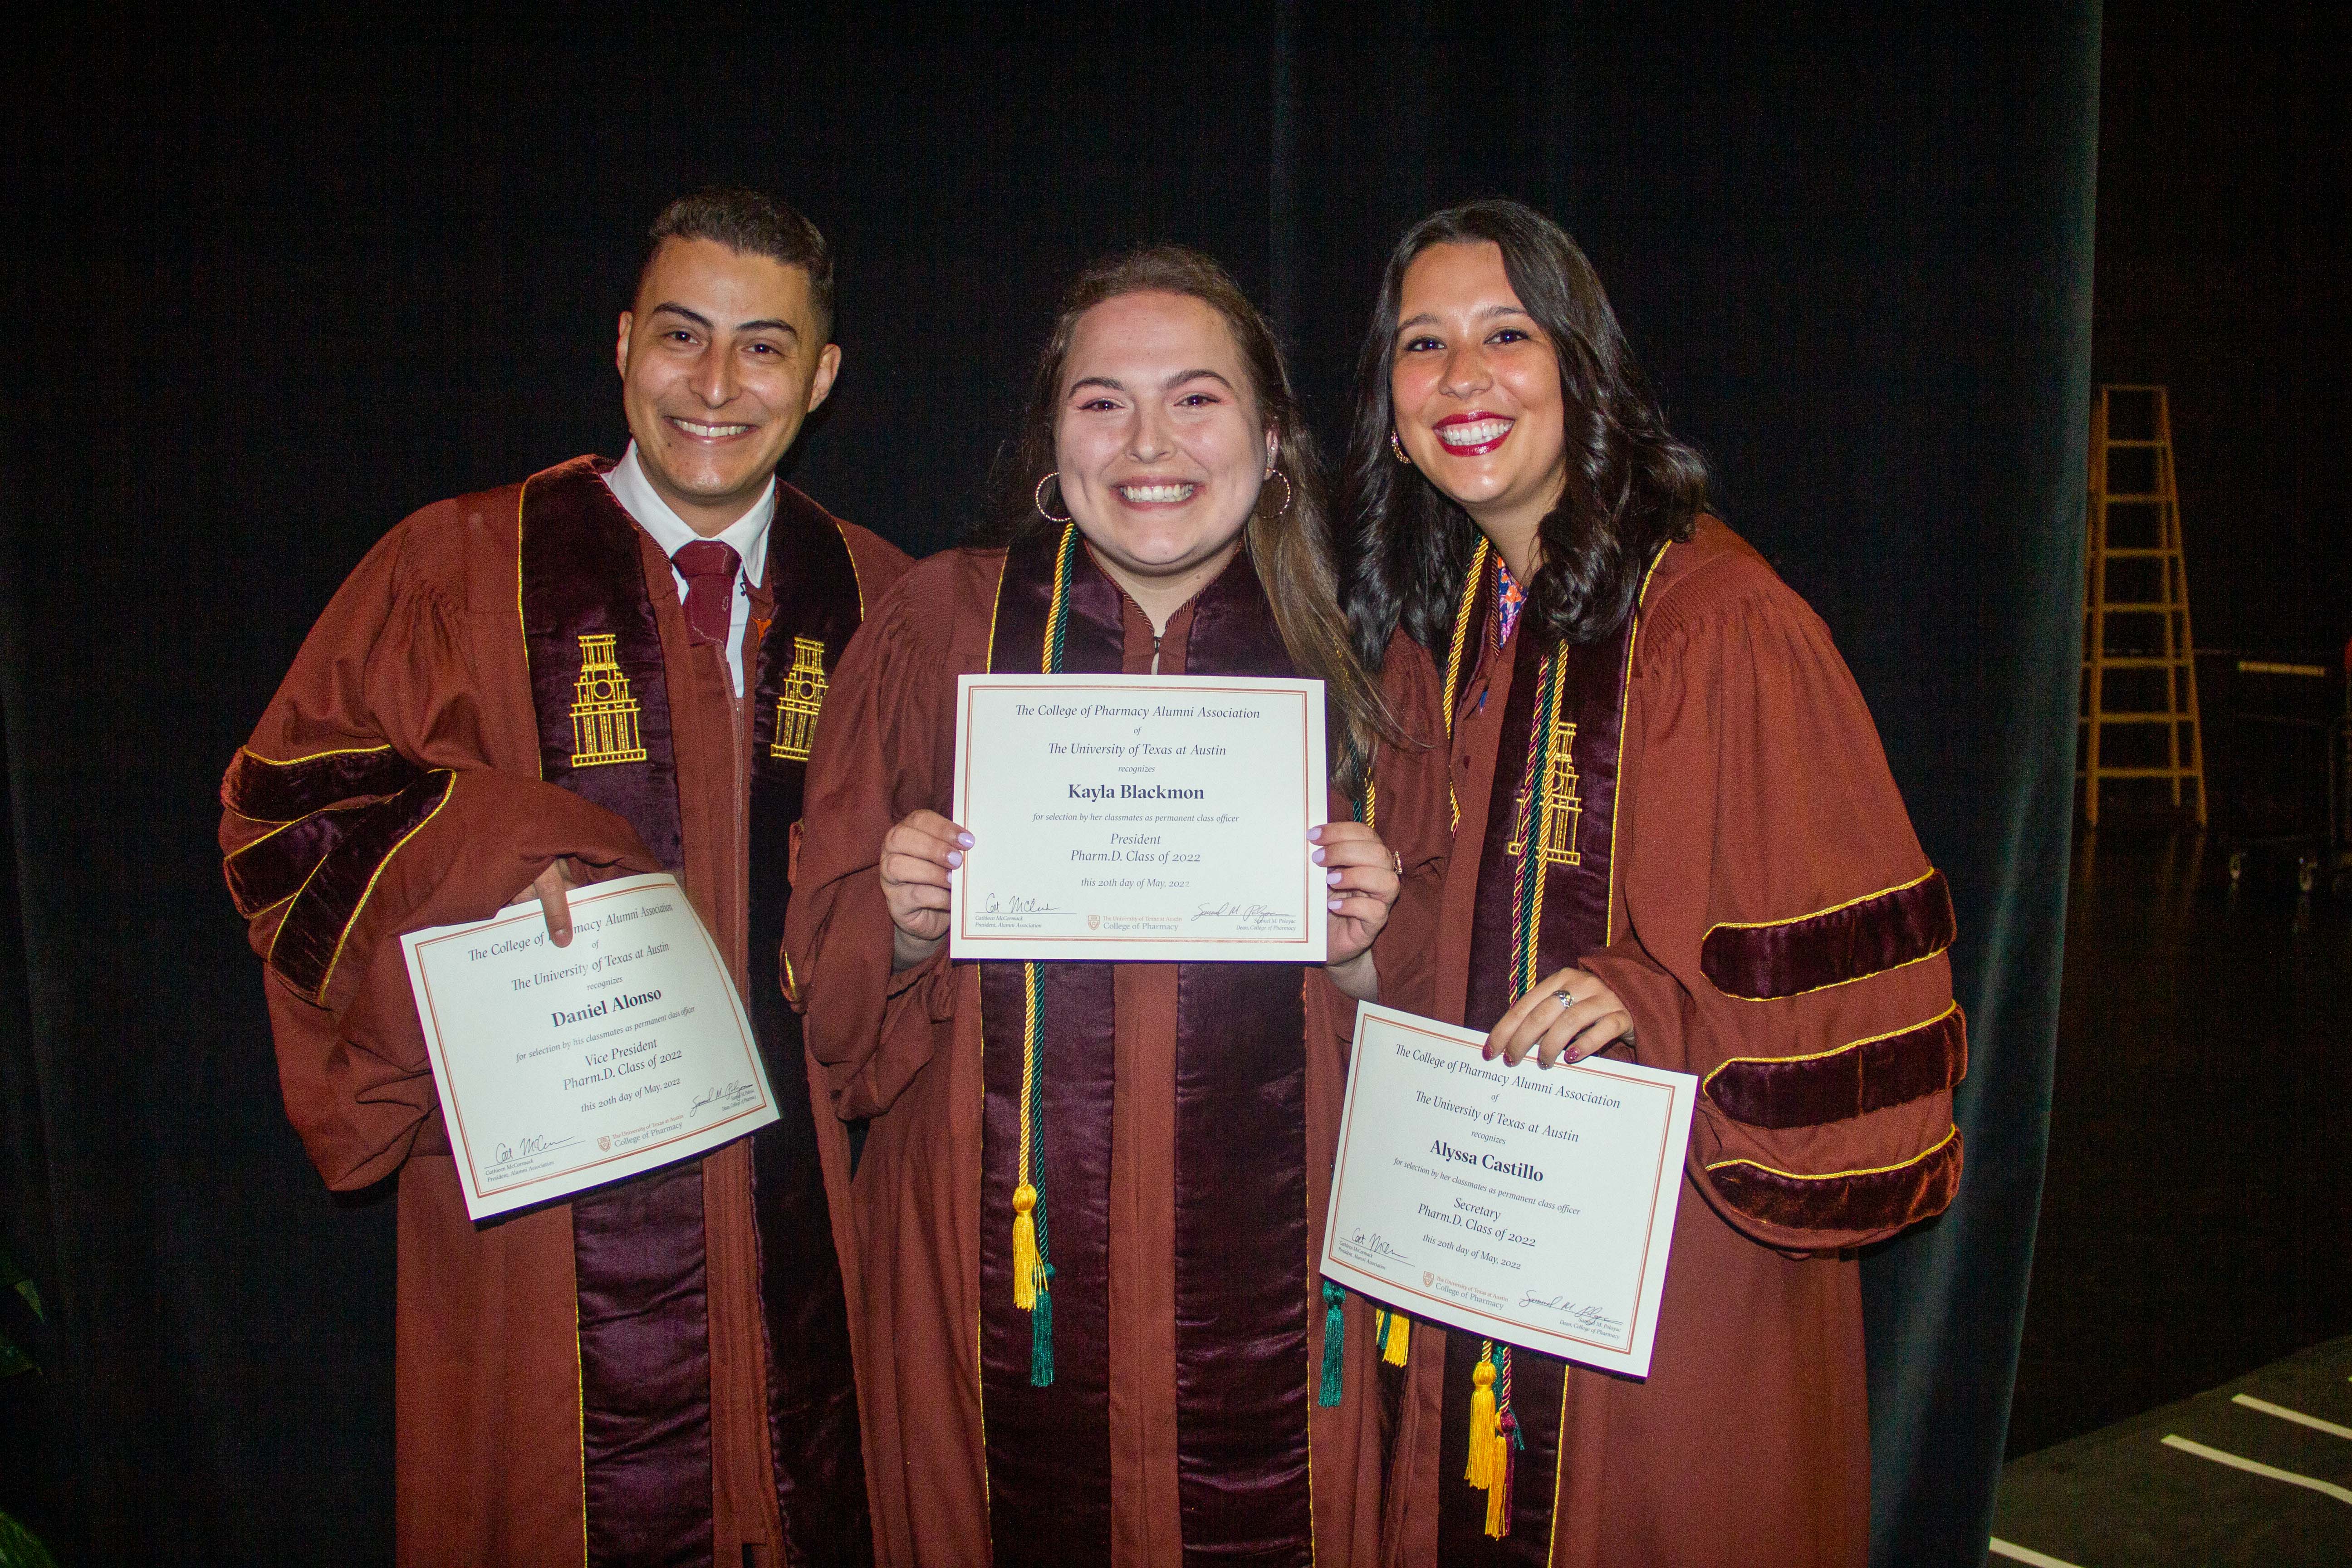 College of Pharmacy 2022 Class Officers (pictured left to right): Daniel, Kayla and Alyssa.